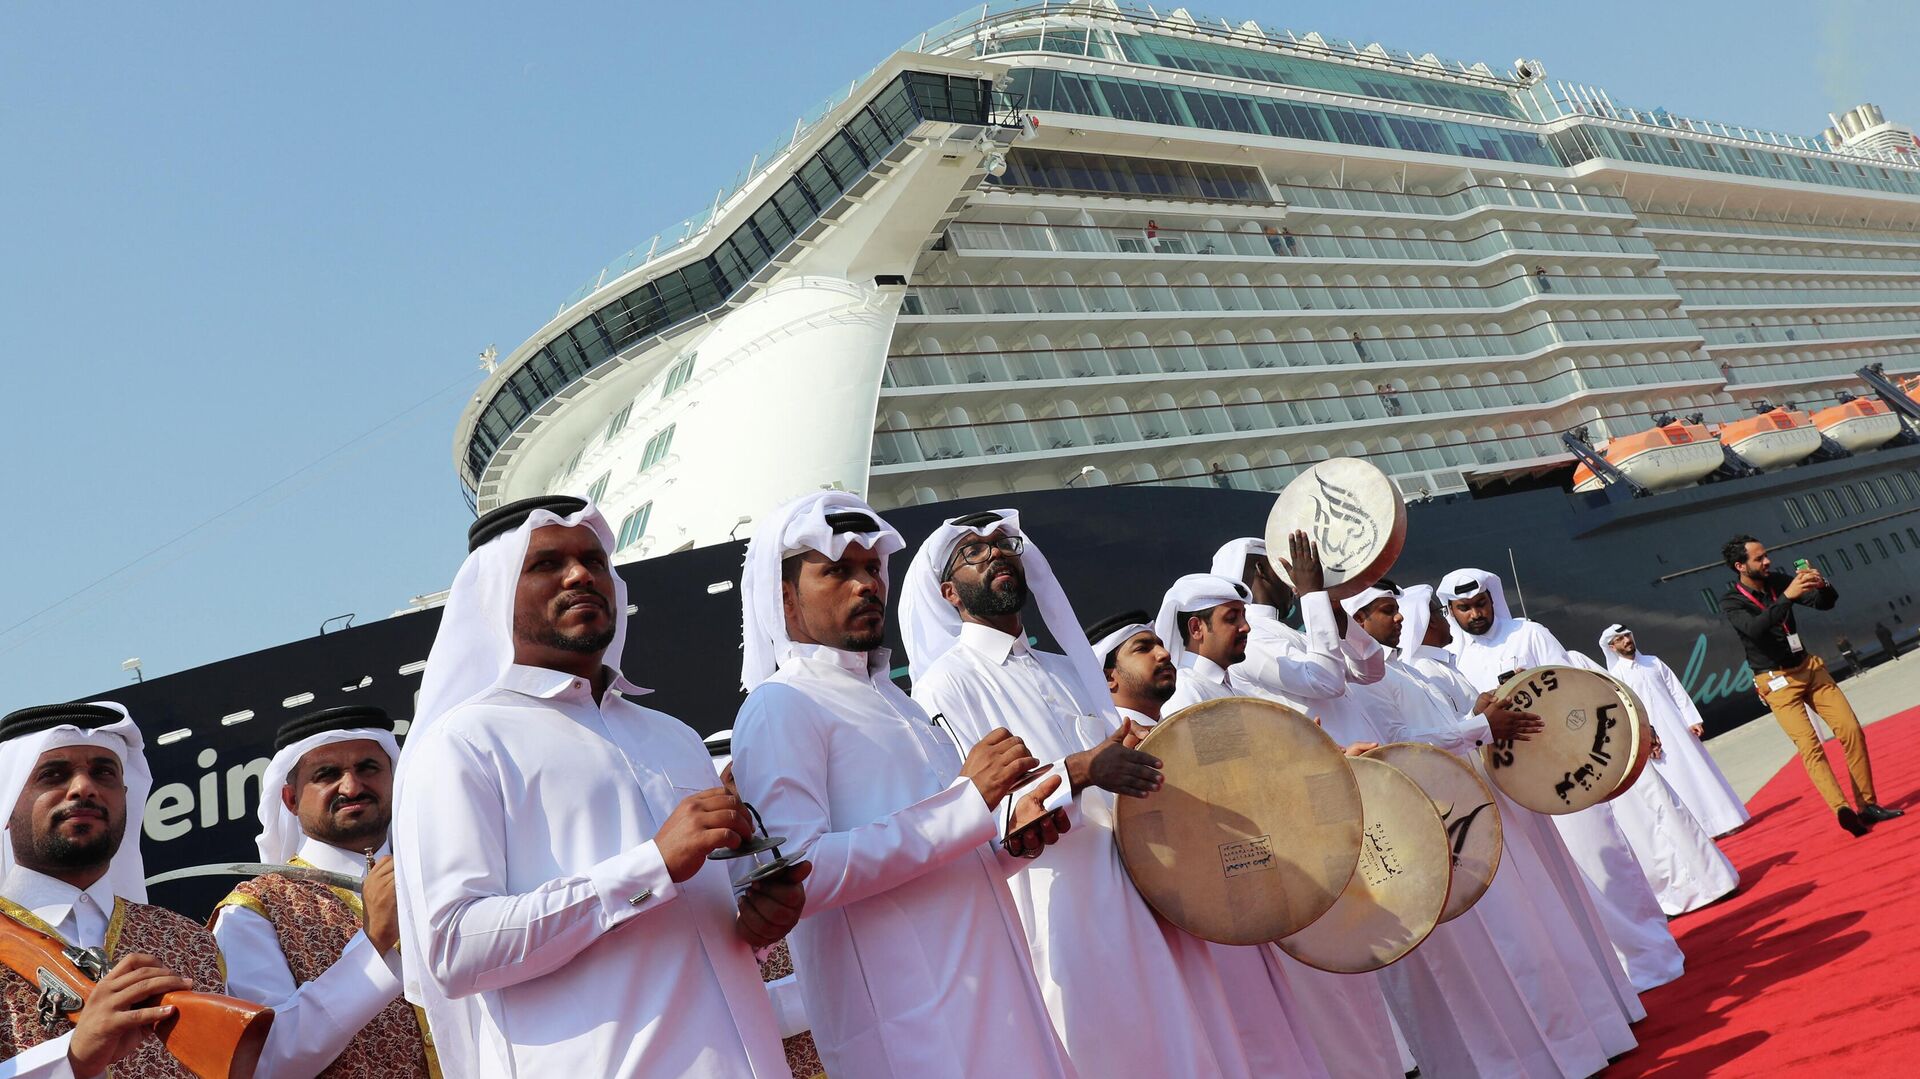 Qatari folk art group welcomes tourists at Doha Port during the launch of a new temporary passenger terminal as Qatar works to increase the number of cruise ships making calls in the Gulf state, in the Qatari capital Doha, on October 22, 2019. - Sputnik International, 1920, 20.10.2022